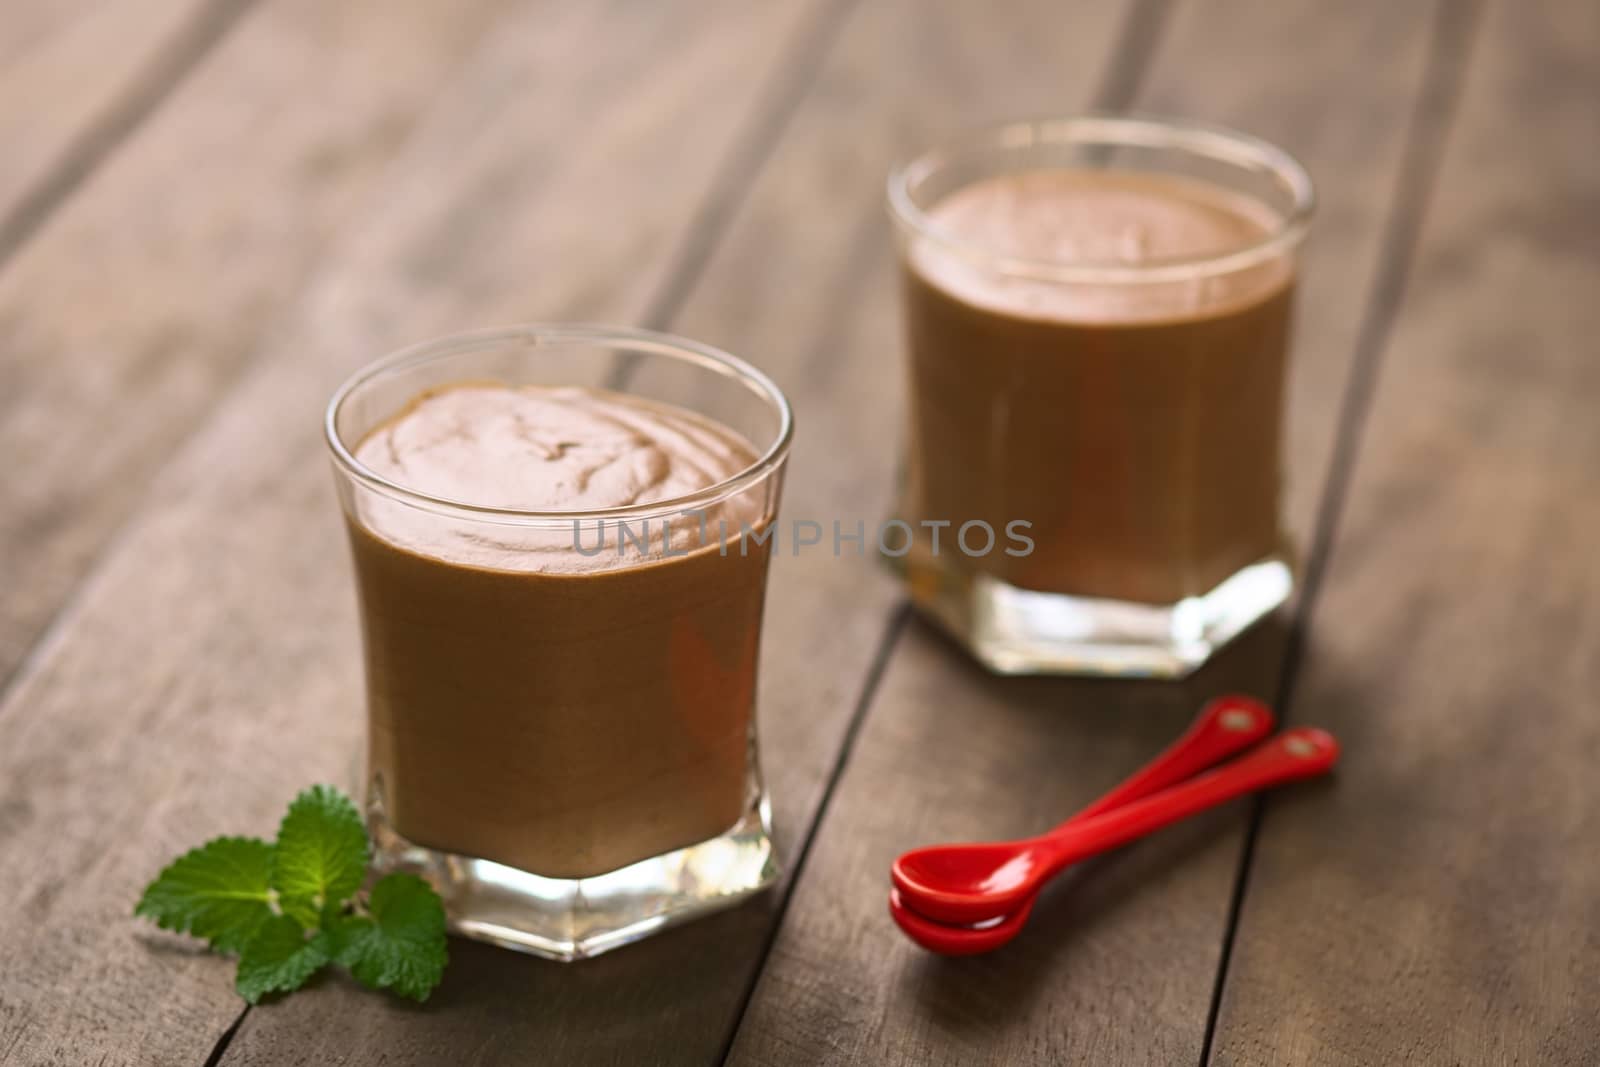 French dessert called Mousse au Chocolat, made of melted chocolate, egg, cream and sugar served in glasses with two small spoons on the side (Selective Focus, Focus on the front rim of the first glass)